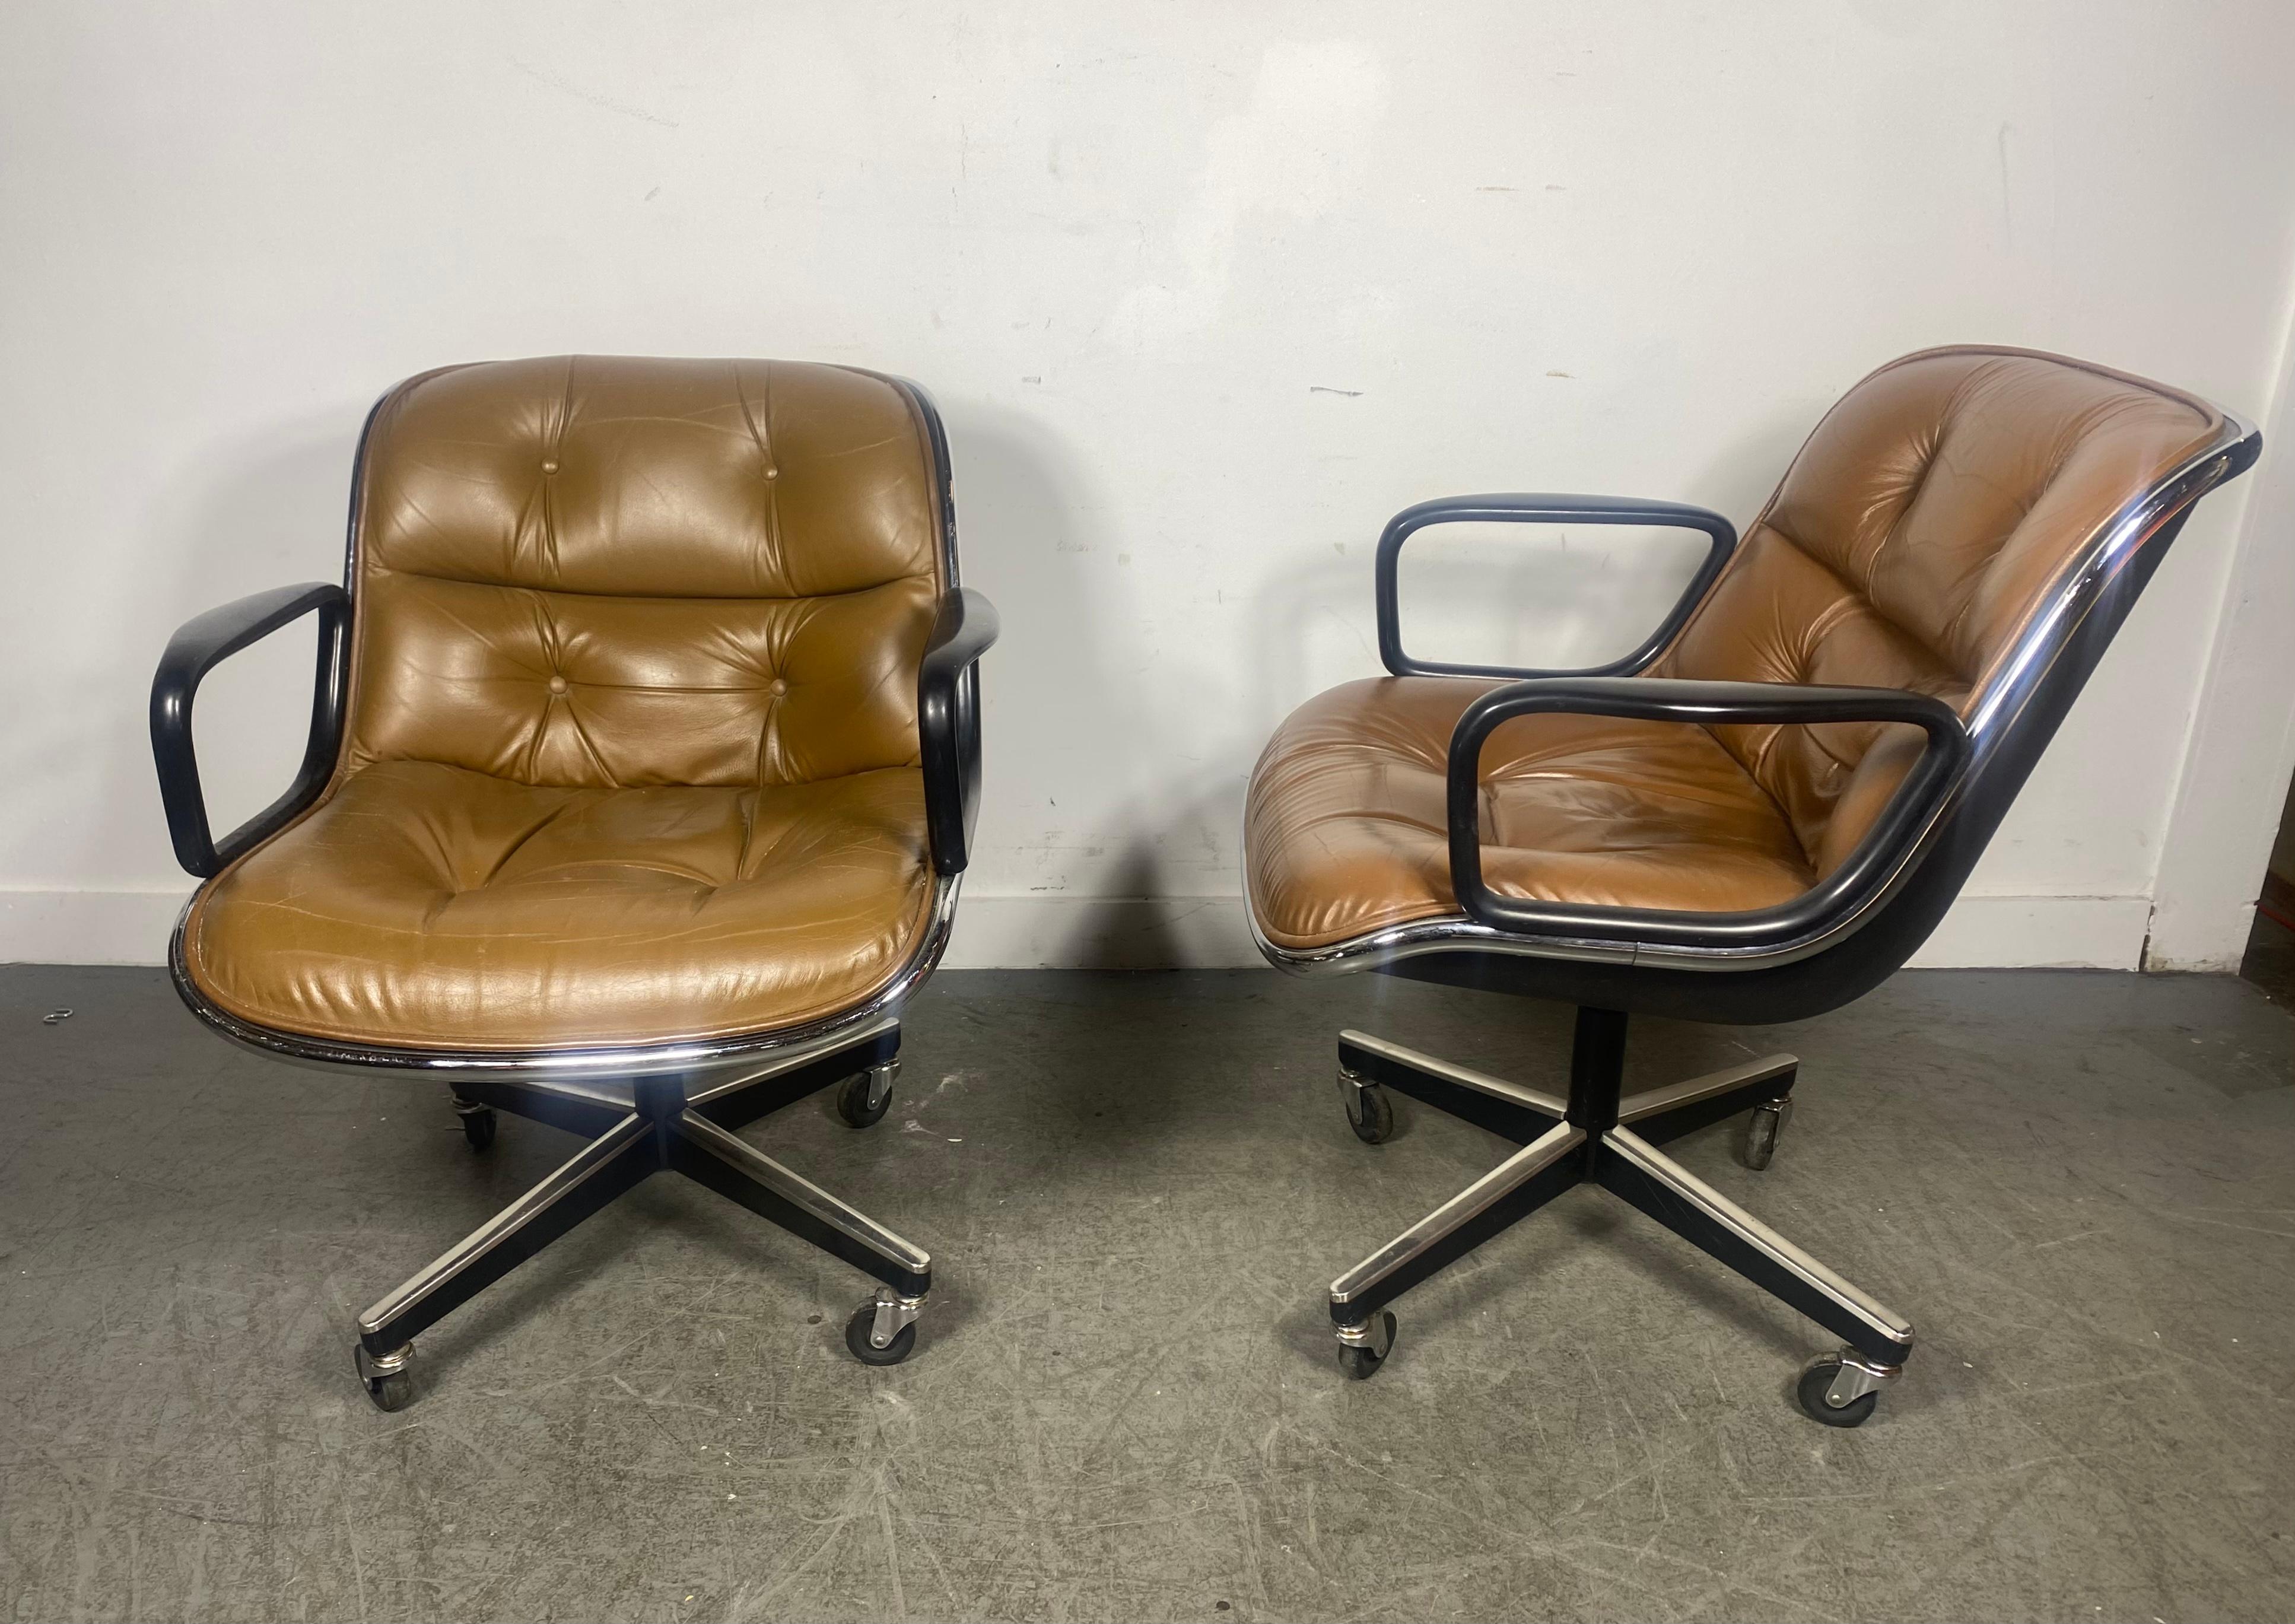 Classic Brown Leather & Chrome Pollock Chairs manufactured by Knoll , 1980s  Bon état - En vente à Buffalo, NY